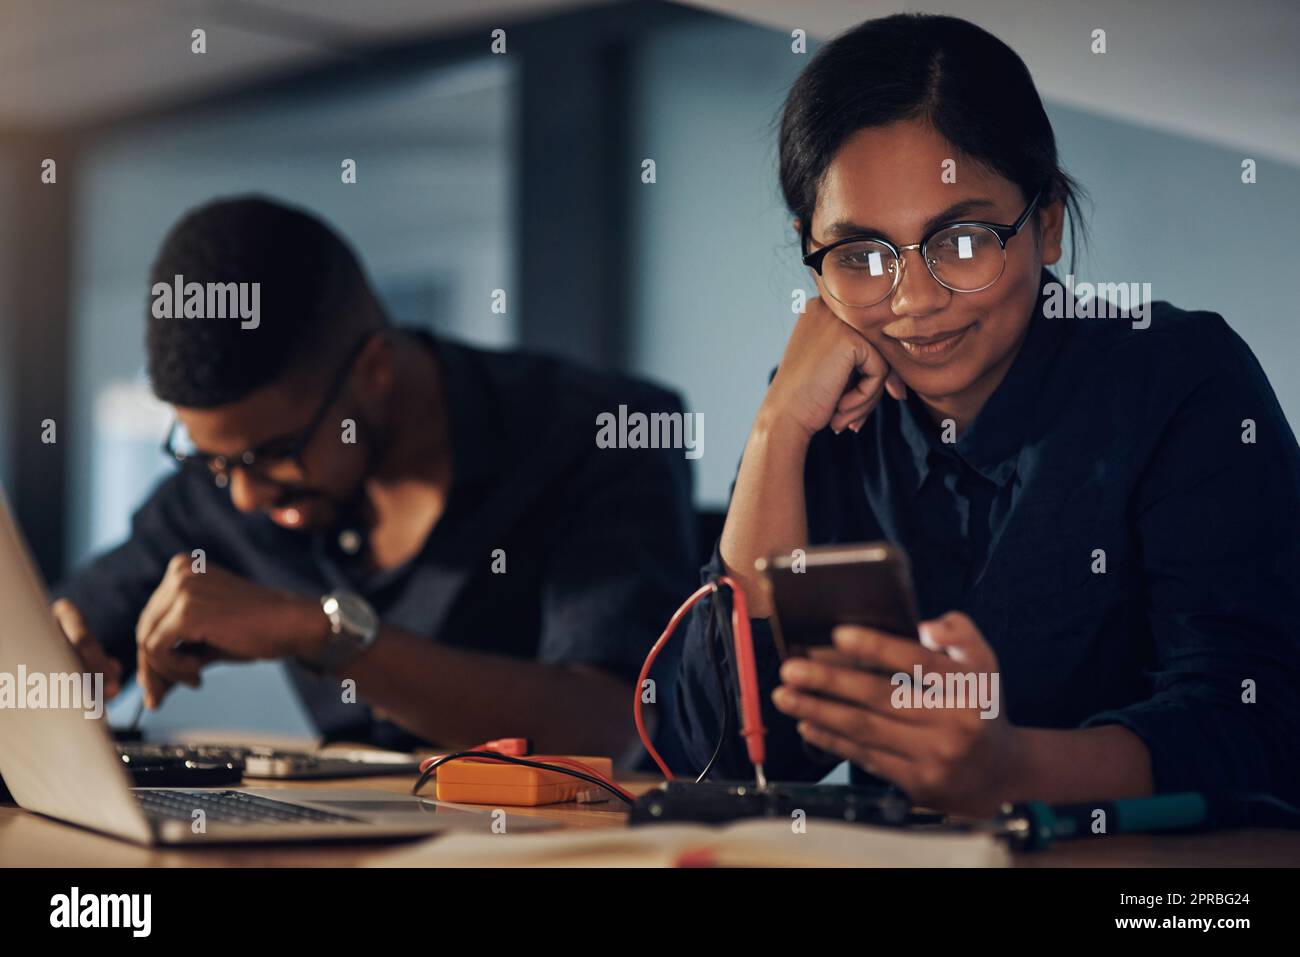 Computer not responding No worries, she will. a young technician using a smartphone while repairing computer hardware. Stock Photo